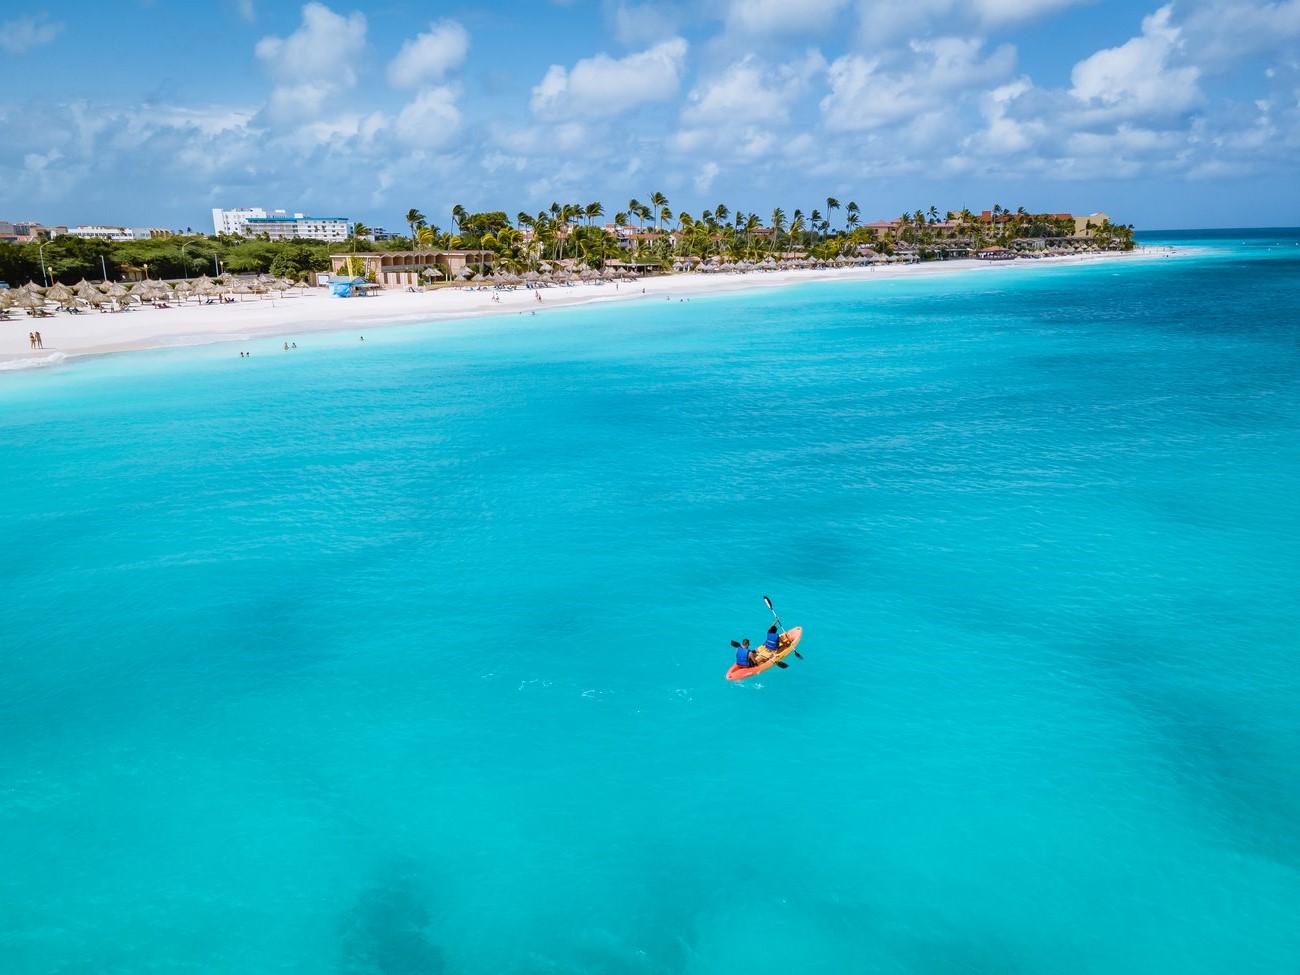 October Weather In Aruba: What To Expect And How To Prepare